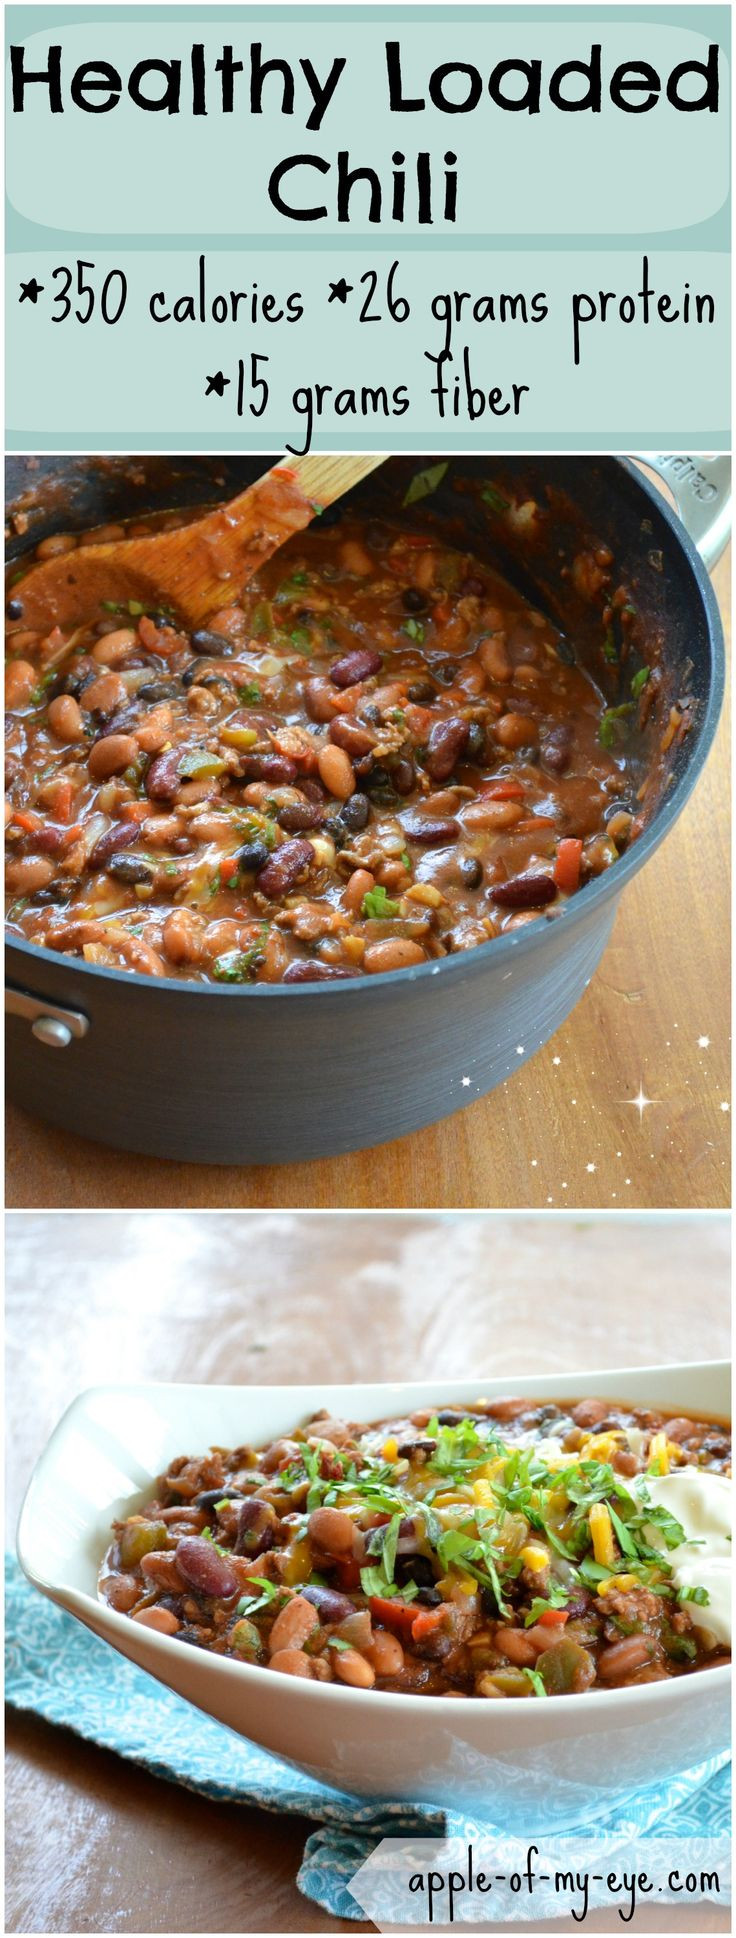 Healthy Beef Chili Recipe
 39 best images about cooking other dinner on Pinterest